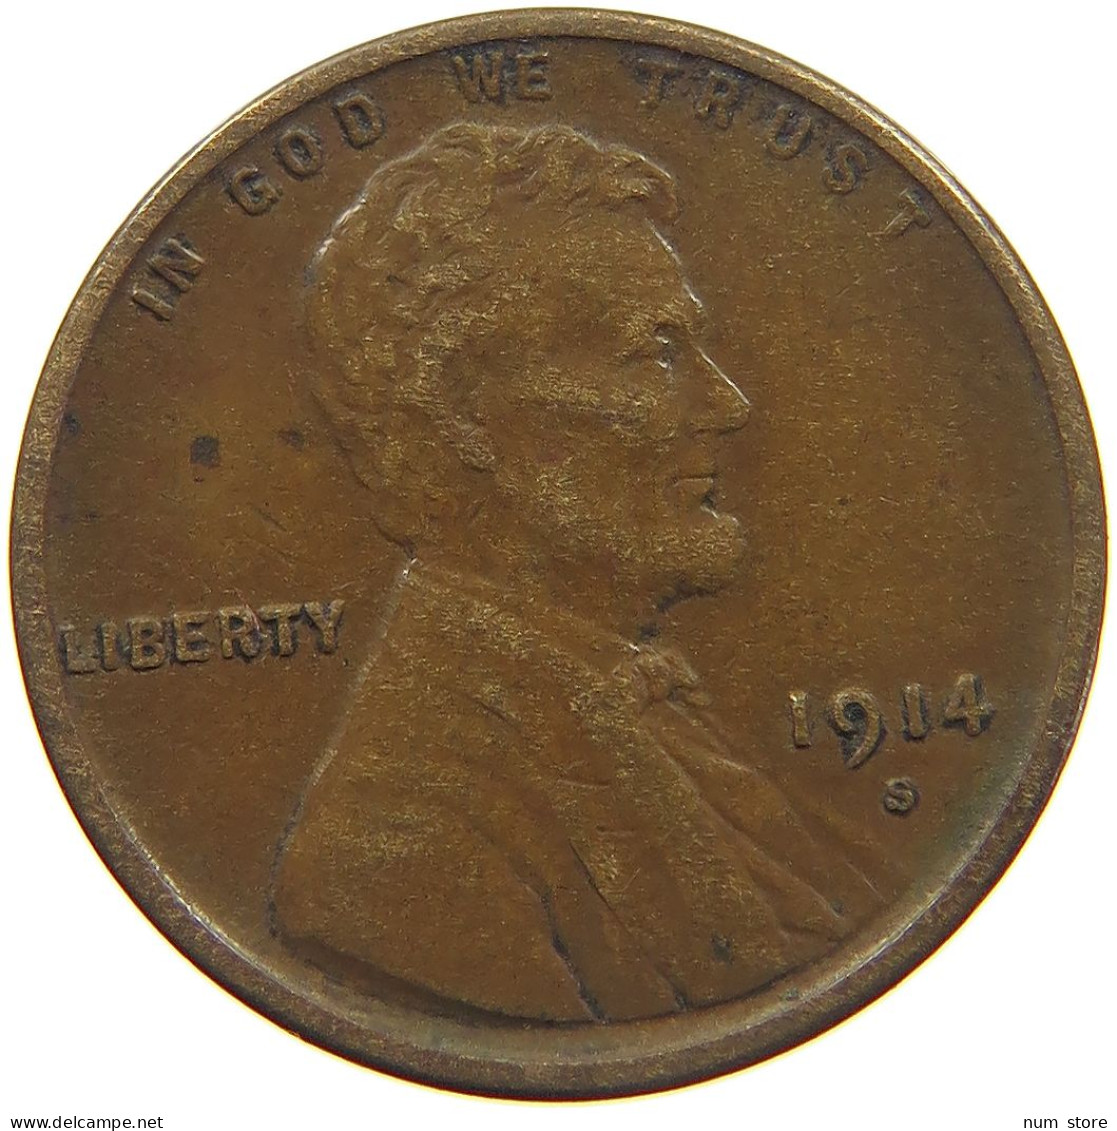 UNITED STATES OF AMERICA CENT 1914 S Lincoln Wheat #t001 0203 - 1909-1958: Lincoln, Wheat Ears Reverse